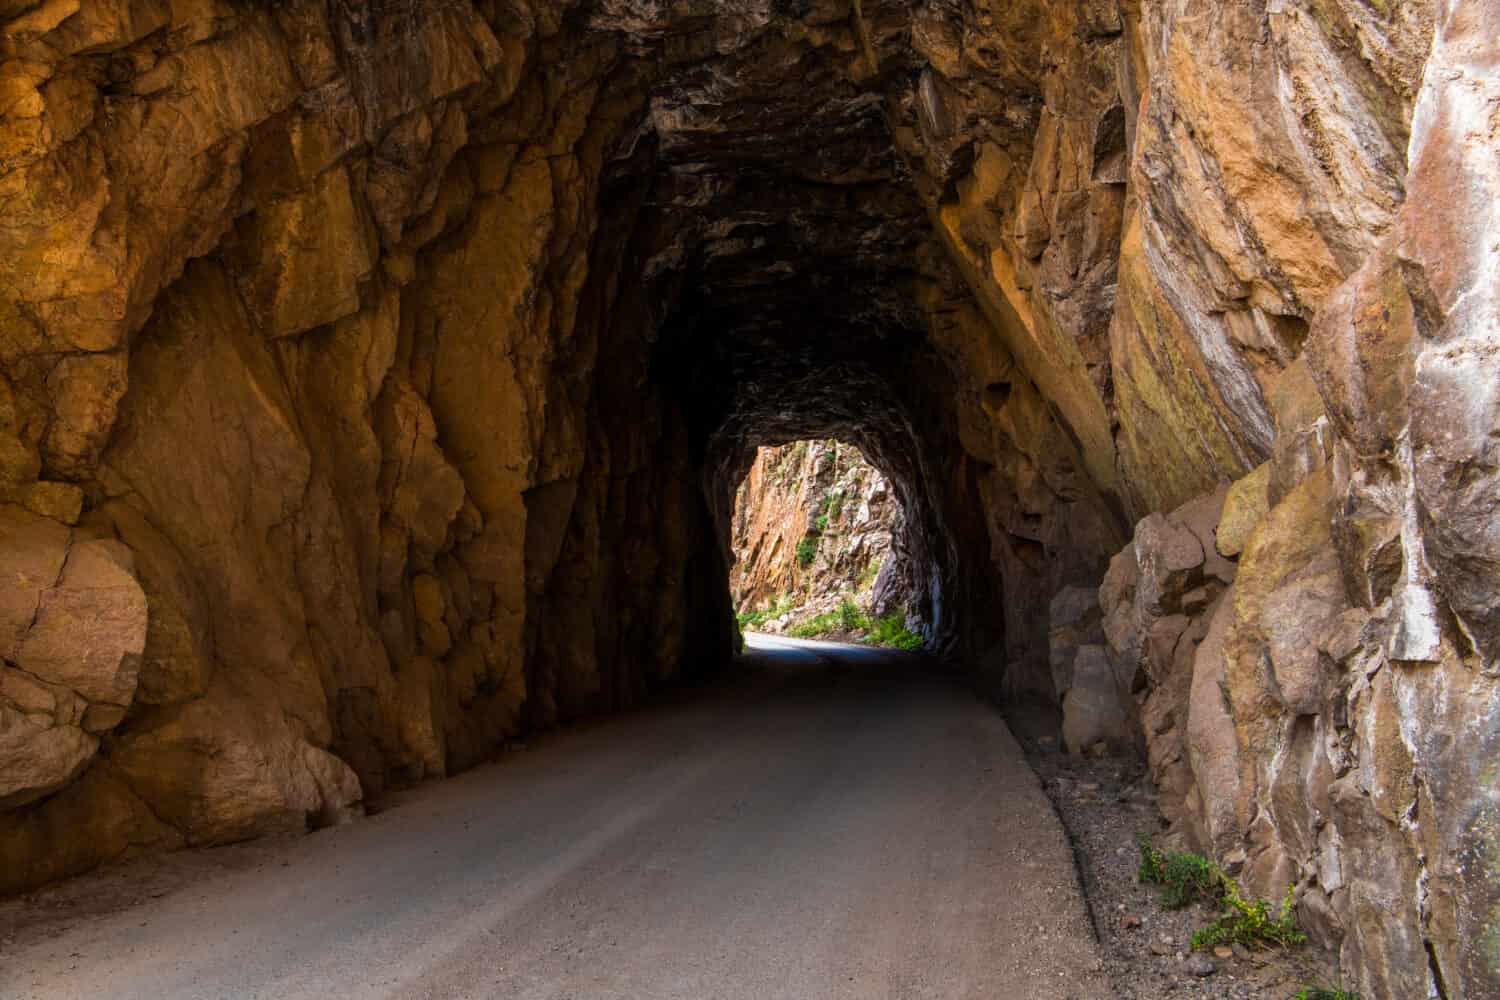 Tunnel and road curving through red rock sandstone - Gilman Tunnels near Jemez Springs in northern New Mexico